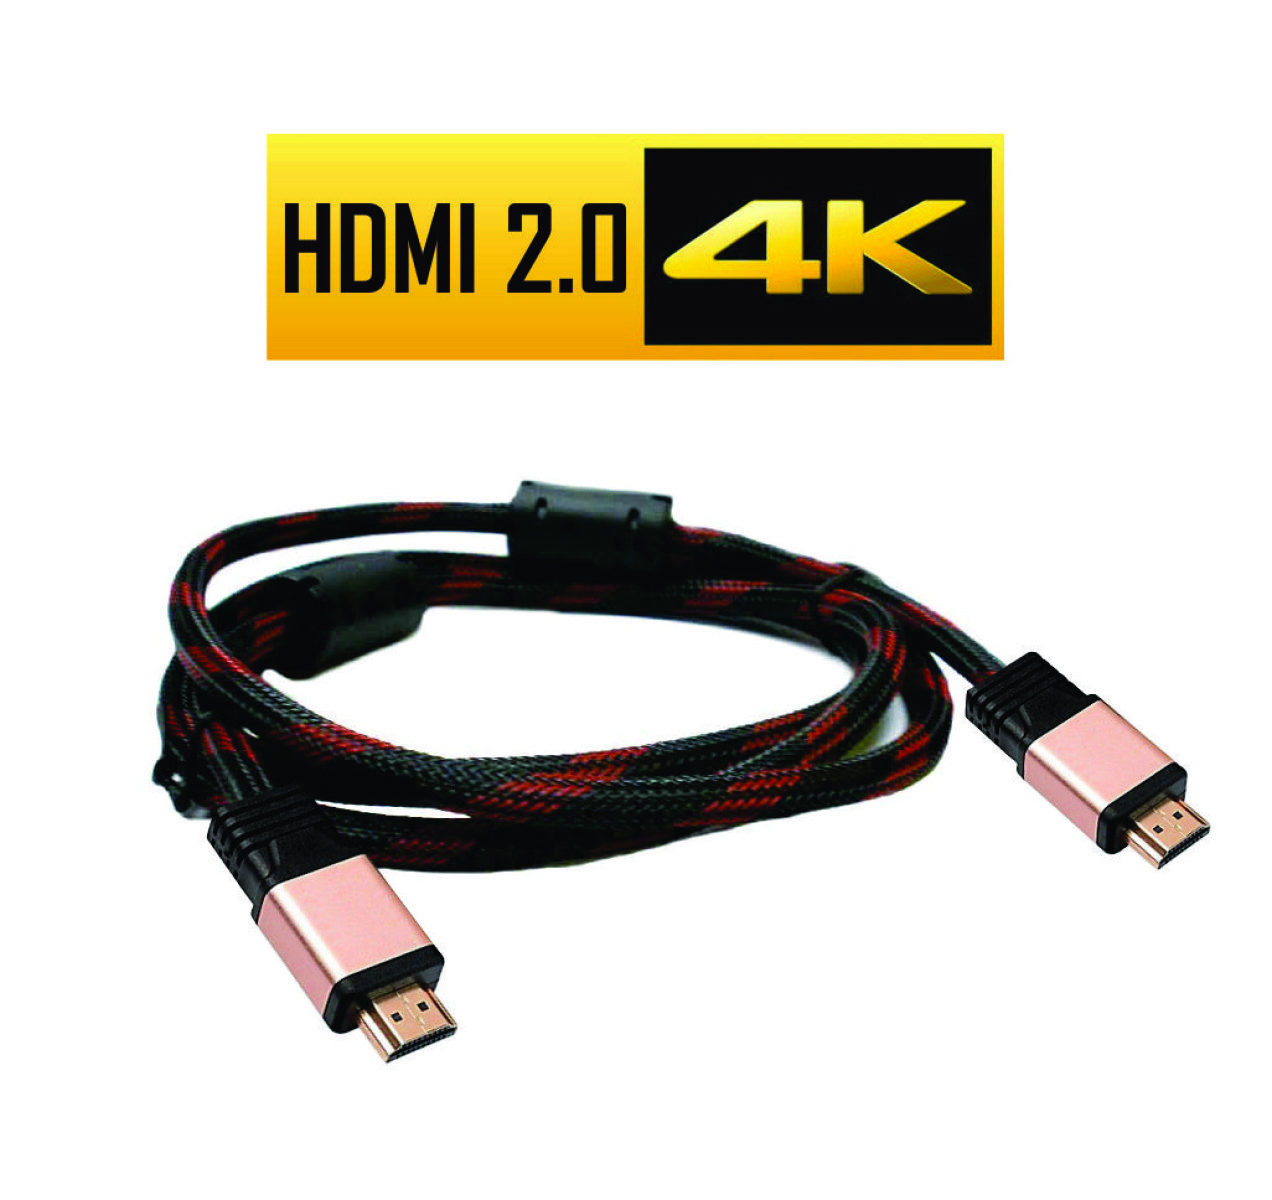 Cable HDMI 2.0 4K 10M - 001 